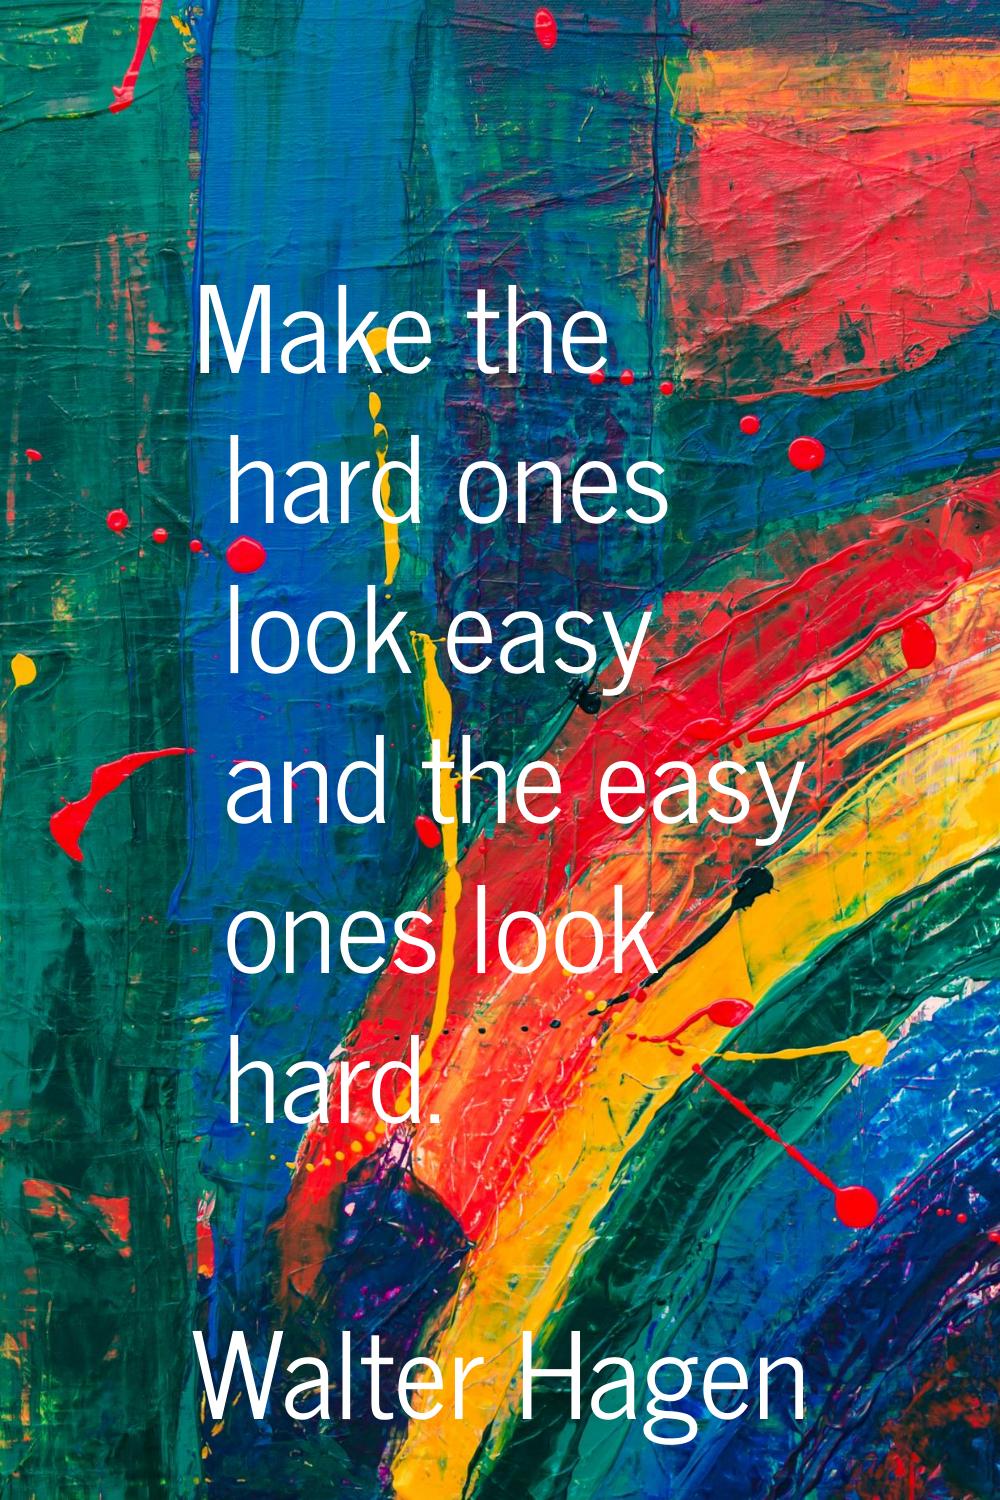 Make the hard ones look easy and the easy ones look hard.